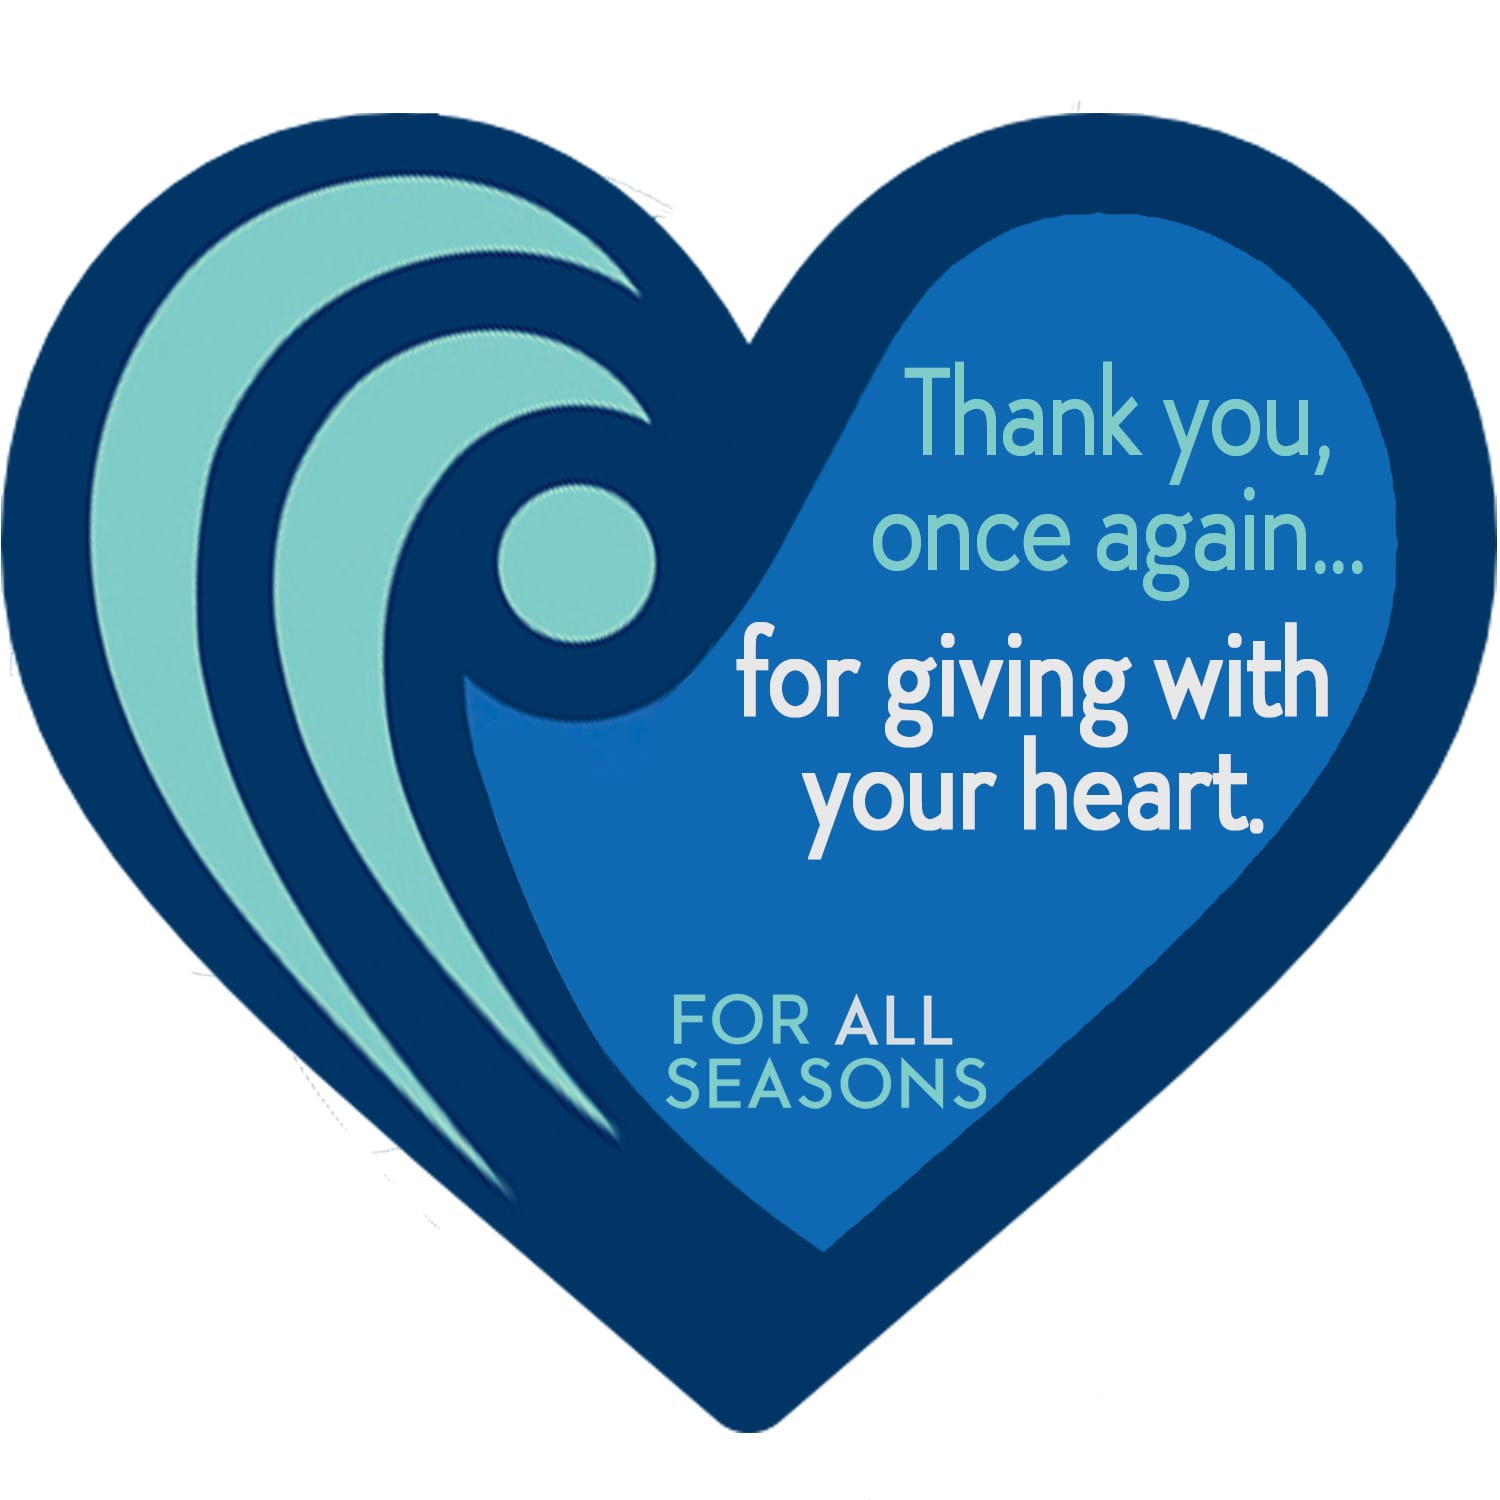 For All Seasons Exceeds Goal and Thanks Sponsors for the Give With Your Heart Campaign